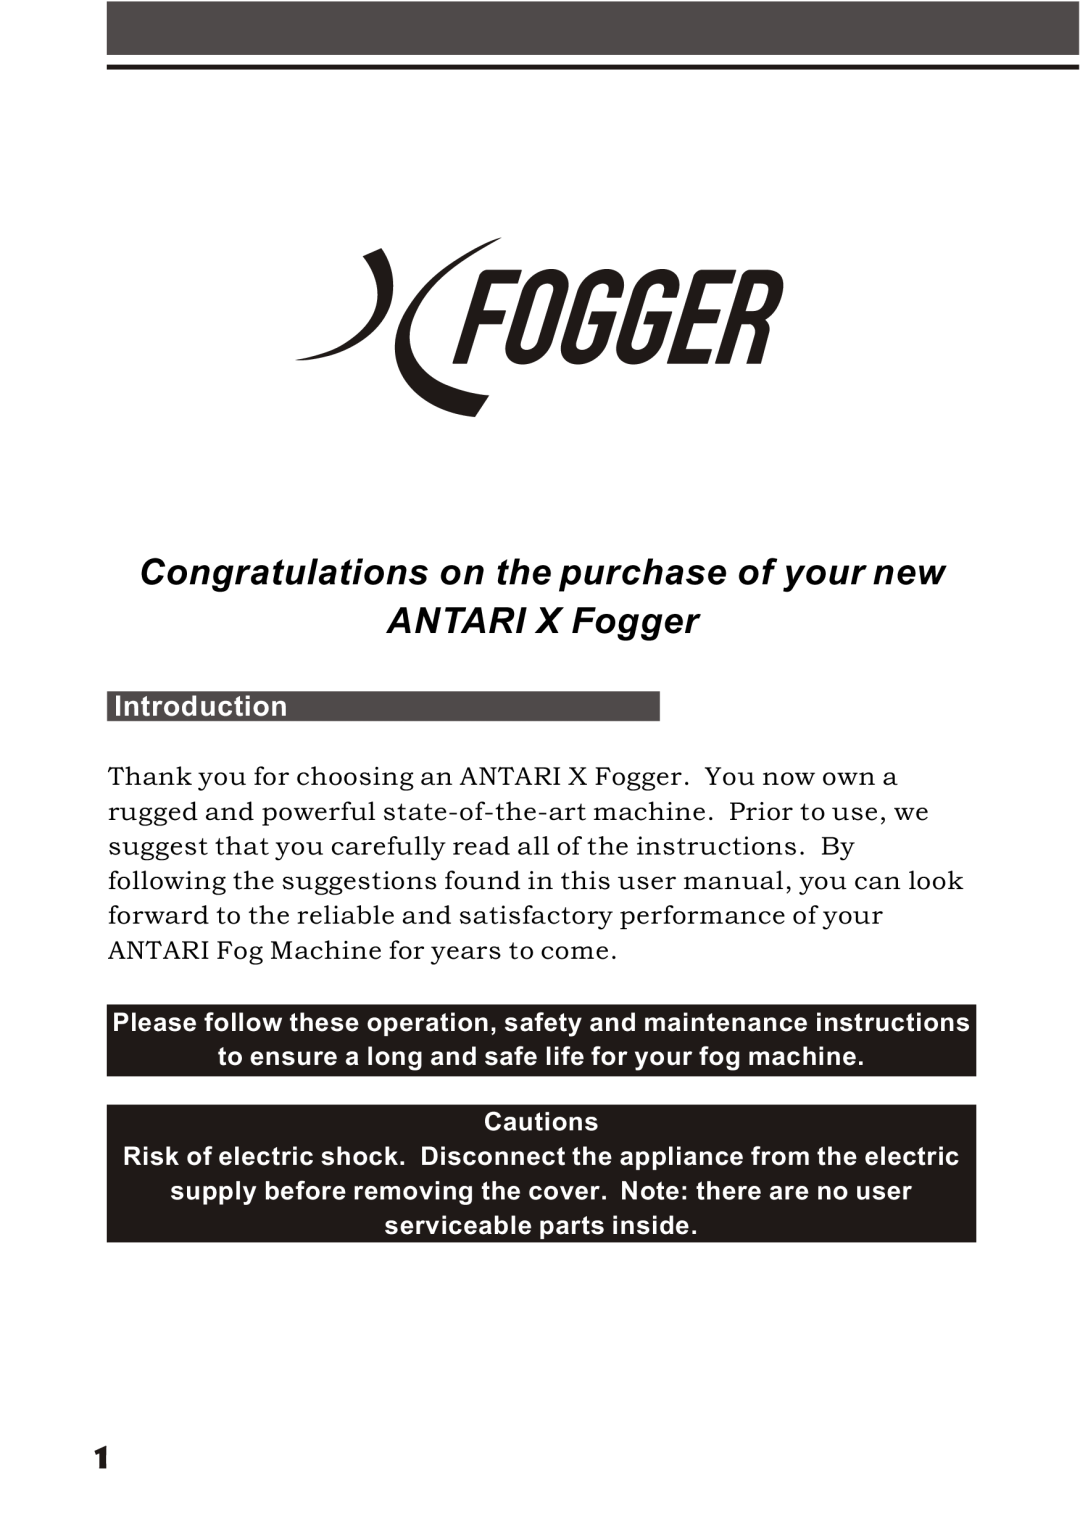 Elation Professional X-Fogger manual Introduction, Congratulations on the purchase of your new, ANTARI X Fogger 